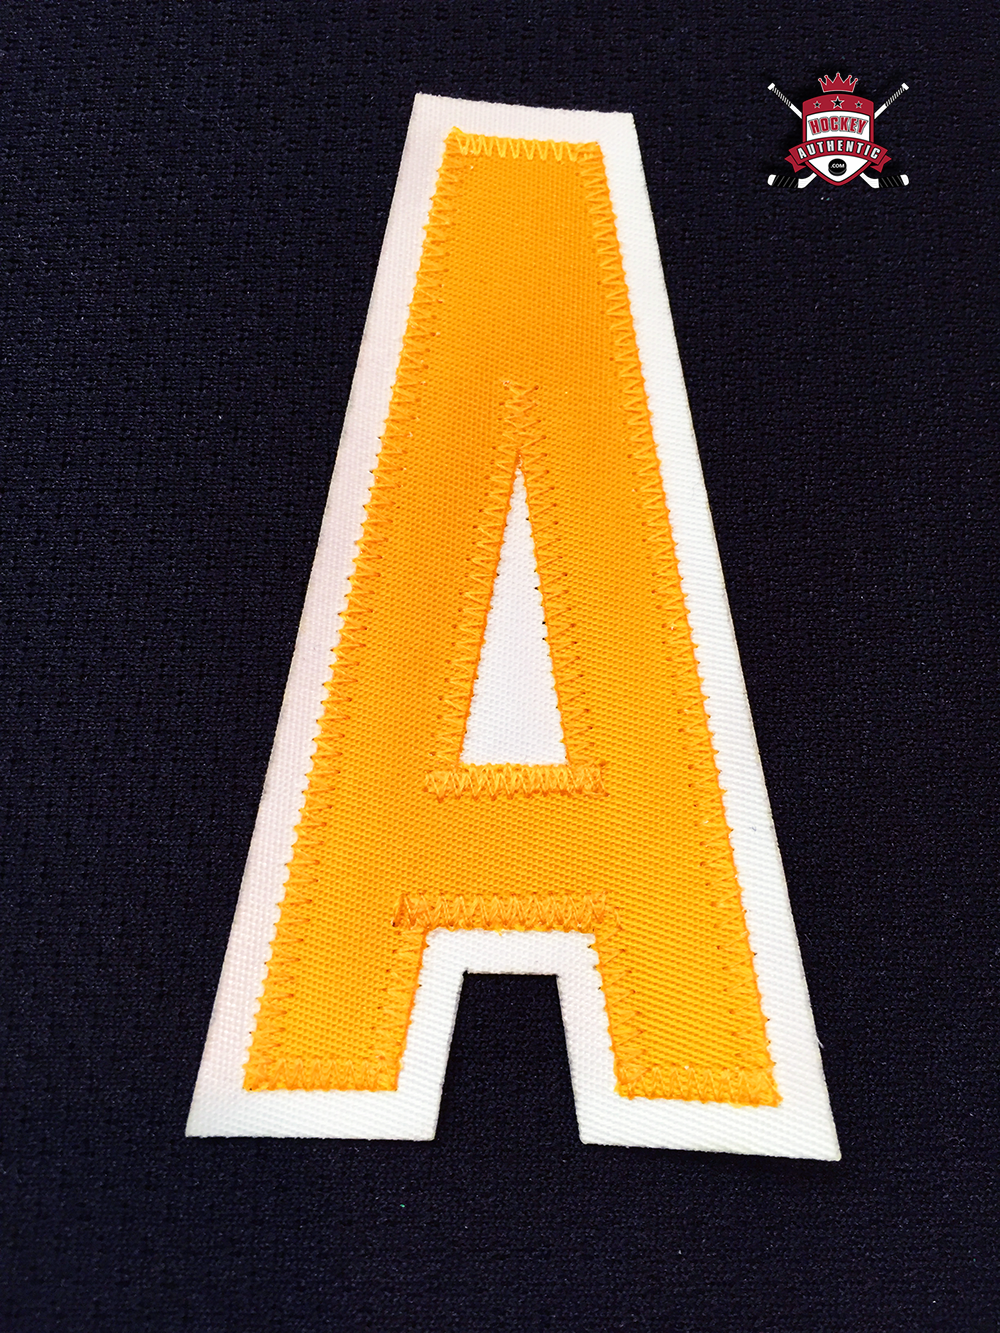 ALTERNATE A OFFICIAL PATCH FOR PITTSBURGH PENGUINS BLACK JERSEY – Hockey  Authentic